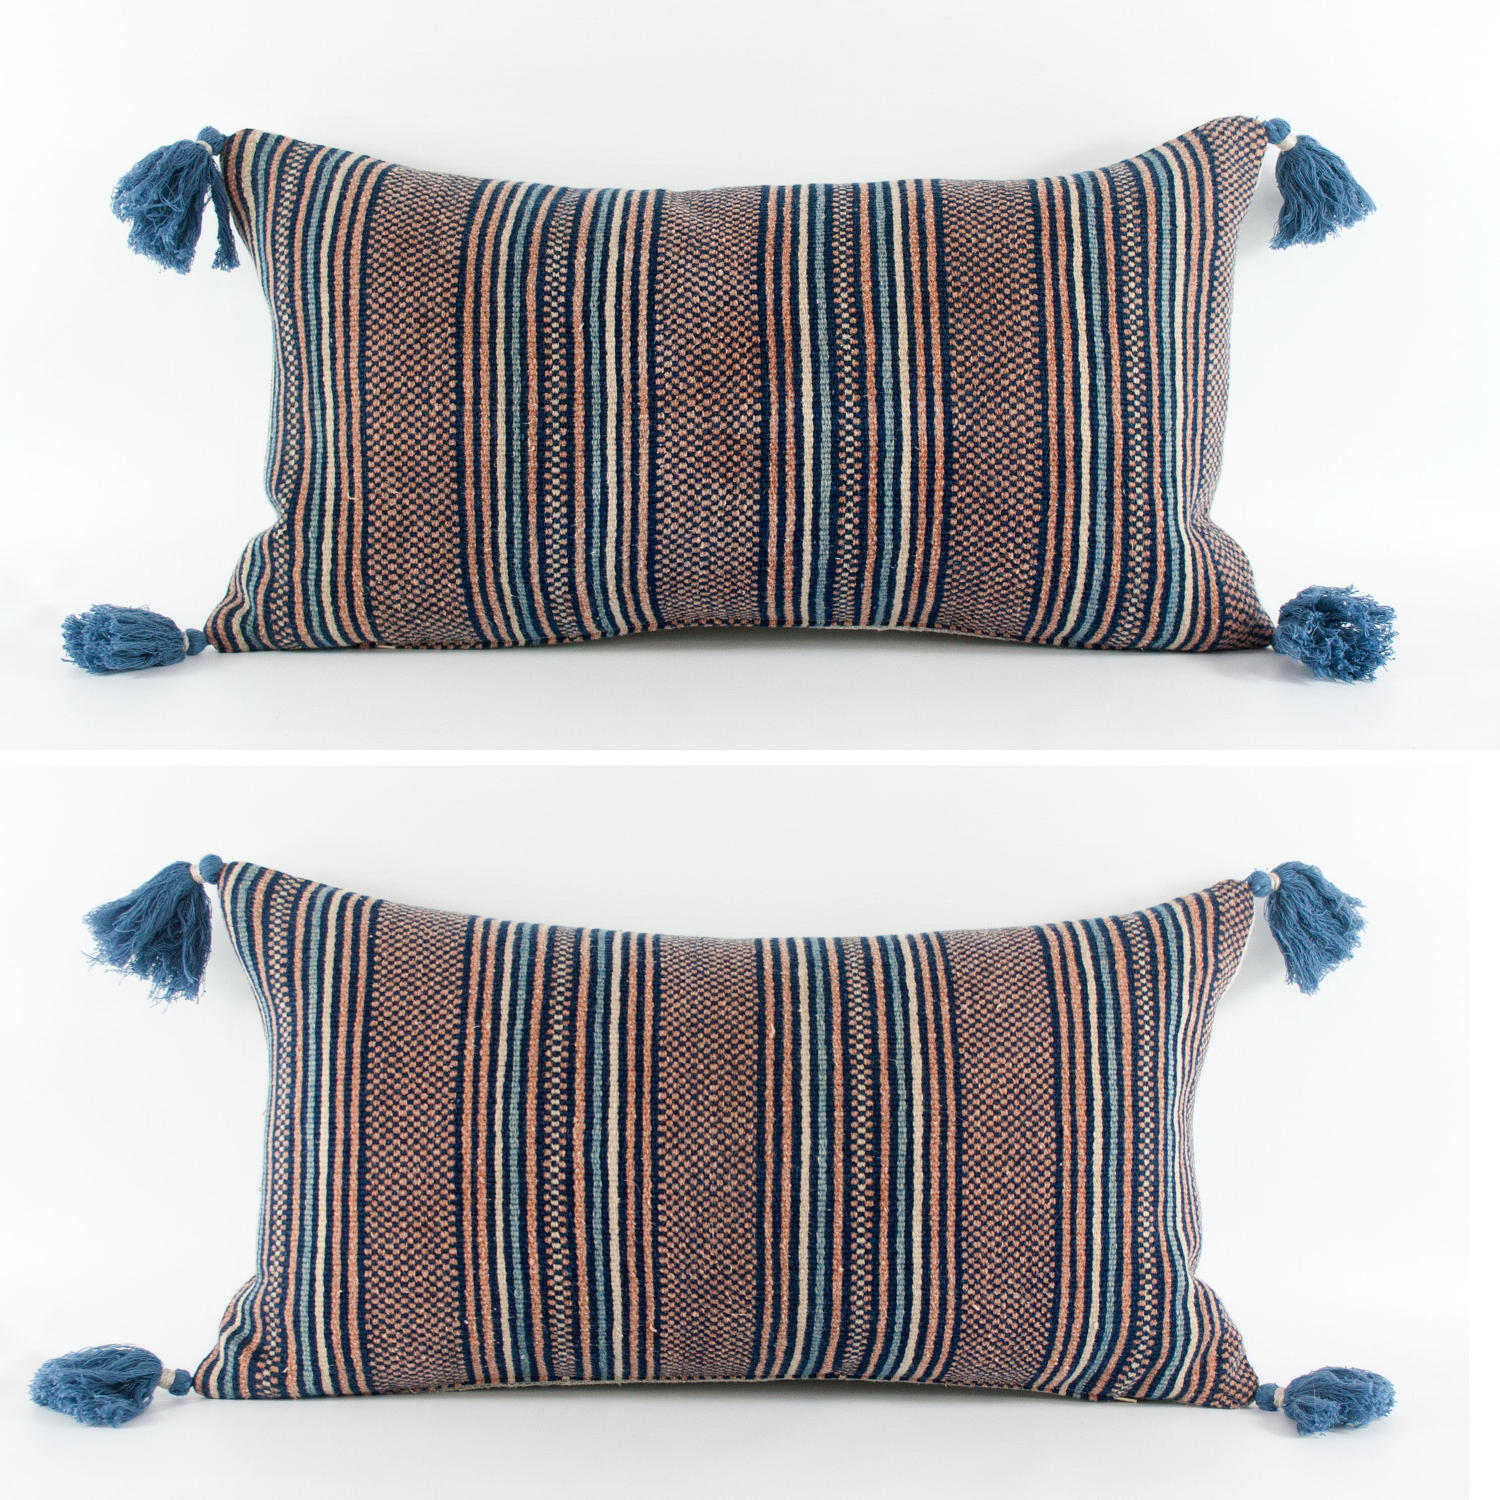 Striped Zhuang Cushions with Tassels